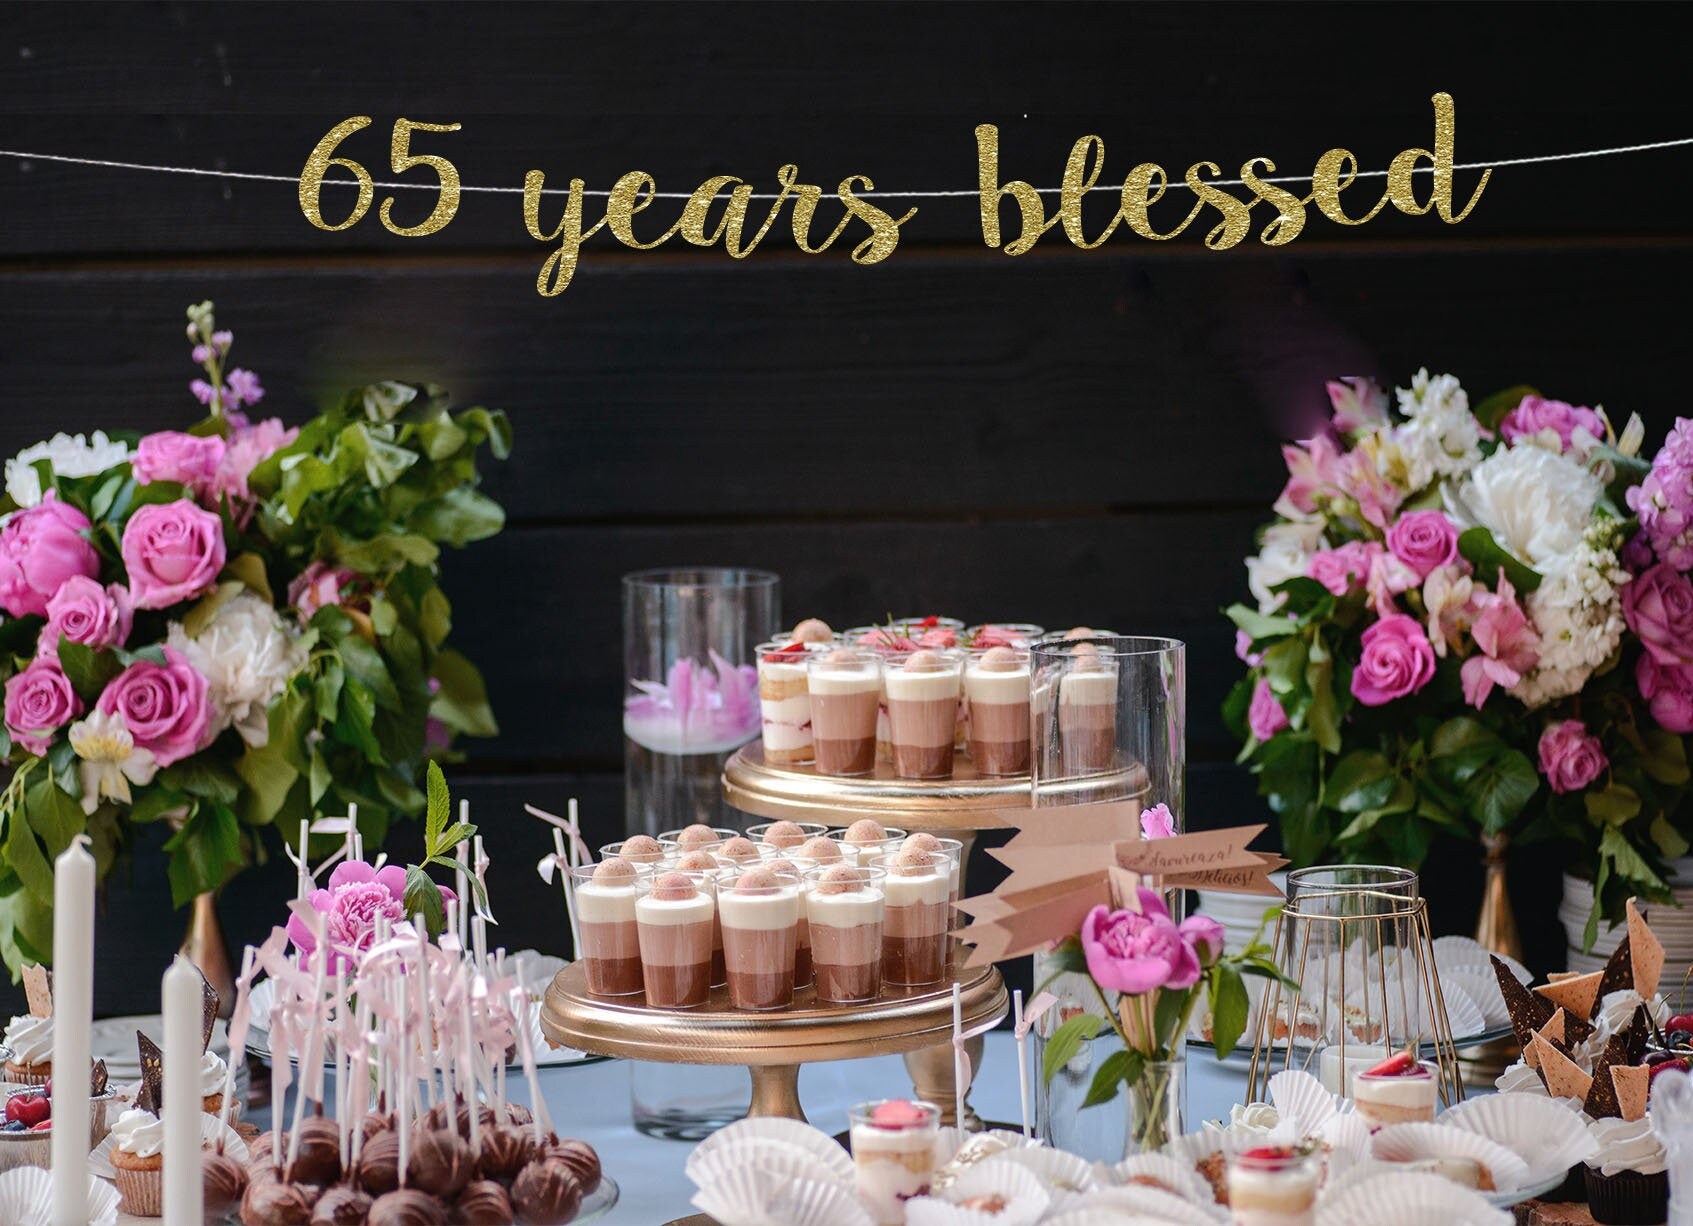 65 Years Blessed Banner 65th Birthday Decor 65th Anniversary - Etsy